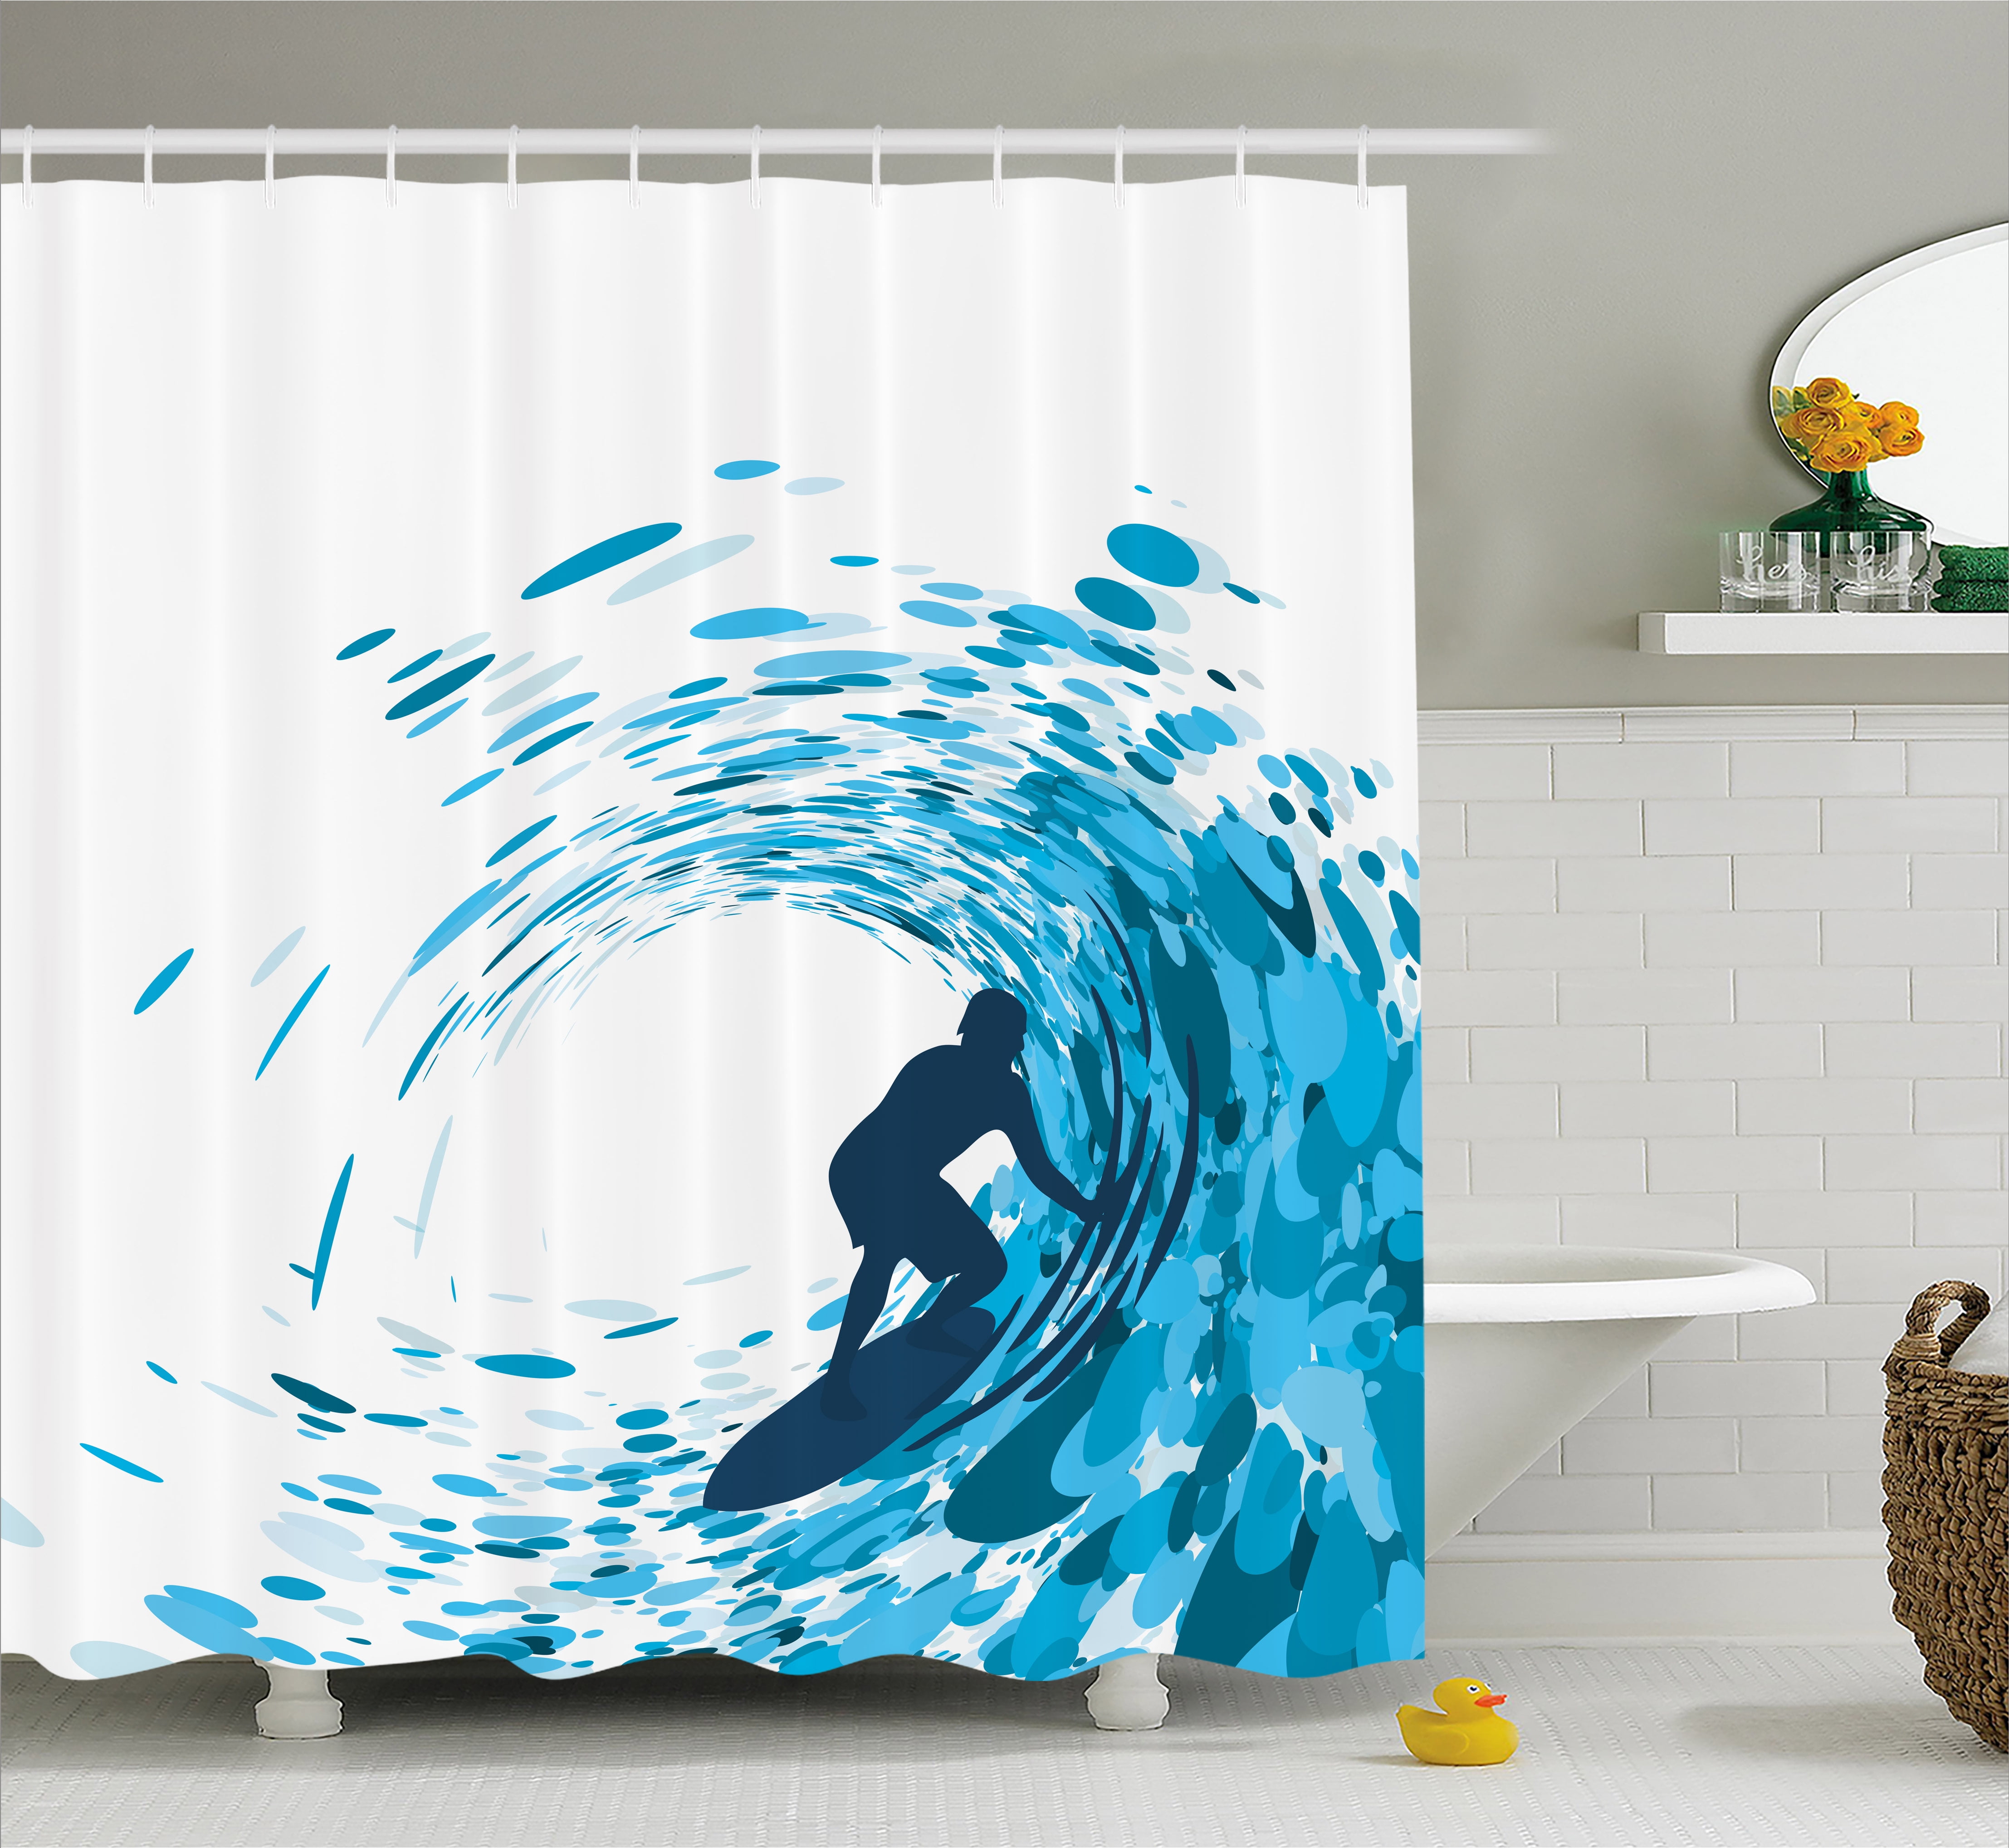 Ride The Wave Shower Curtain, Silhouette of a Surfer under Giant Ocean ...